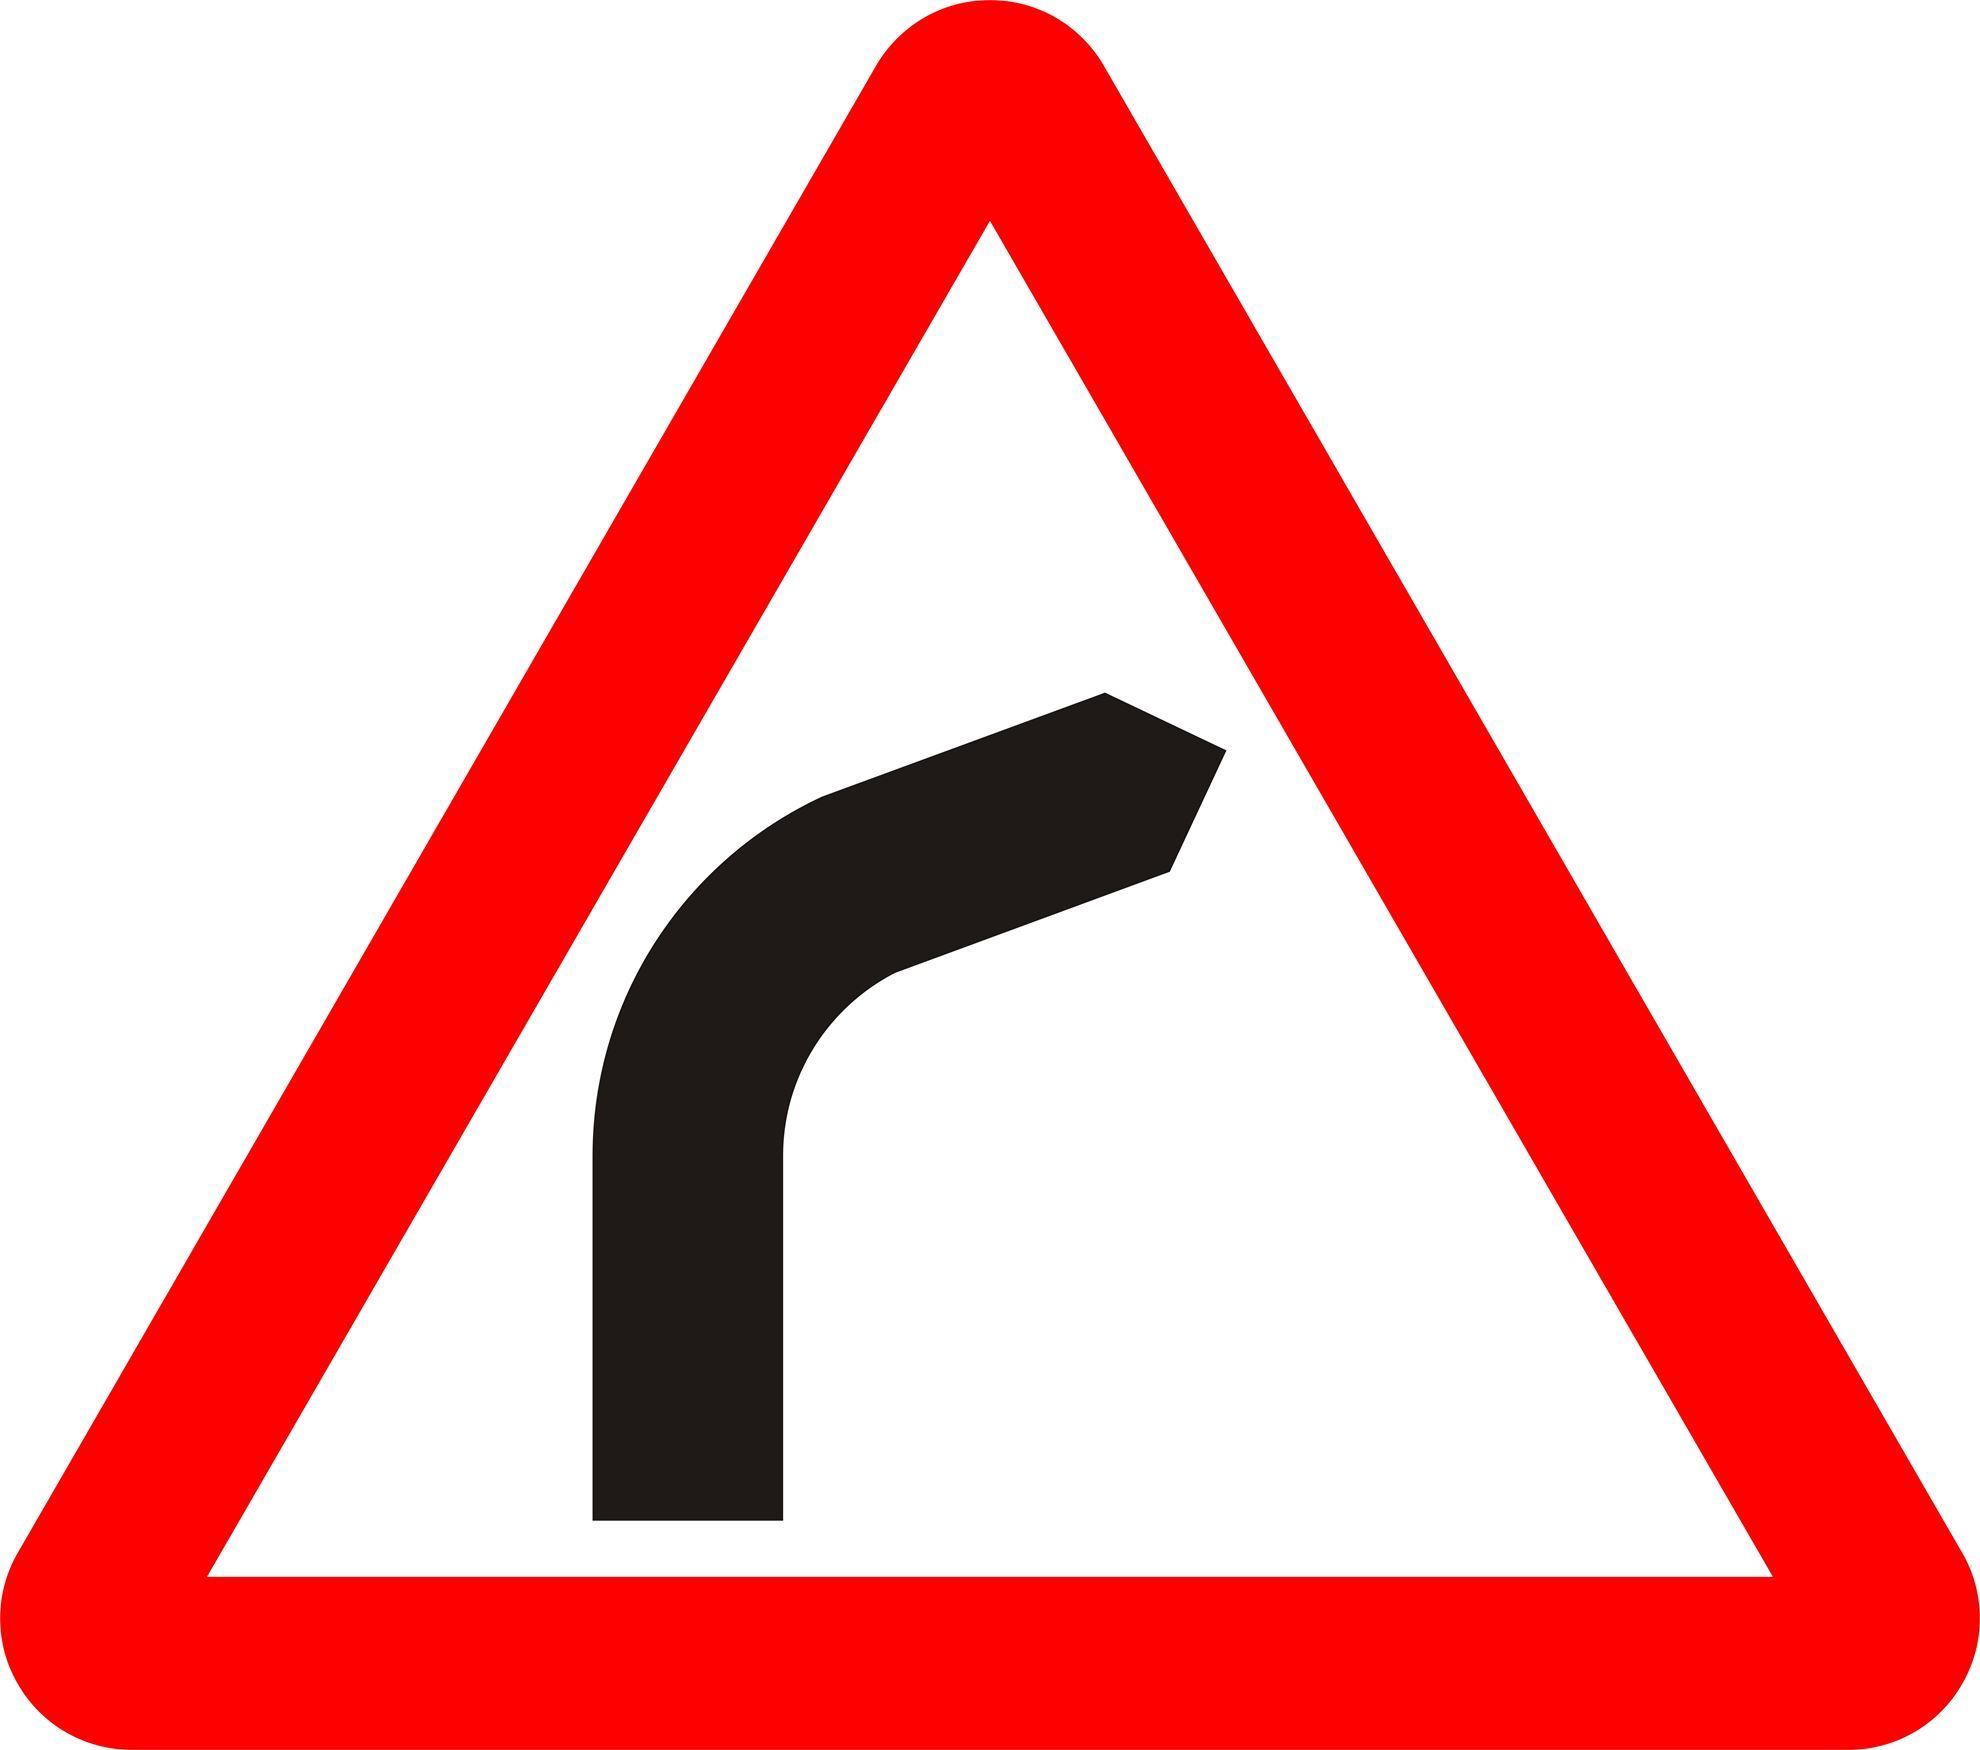 0000118_bend-ahead-right-road-sign.jpeg